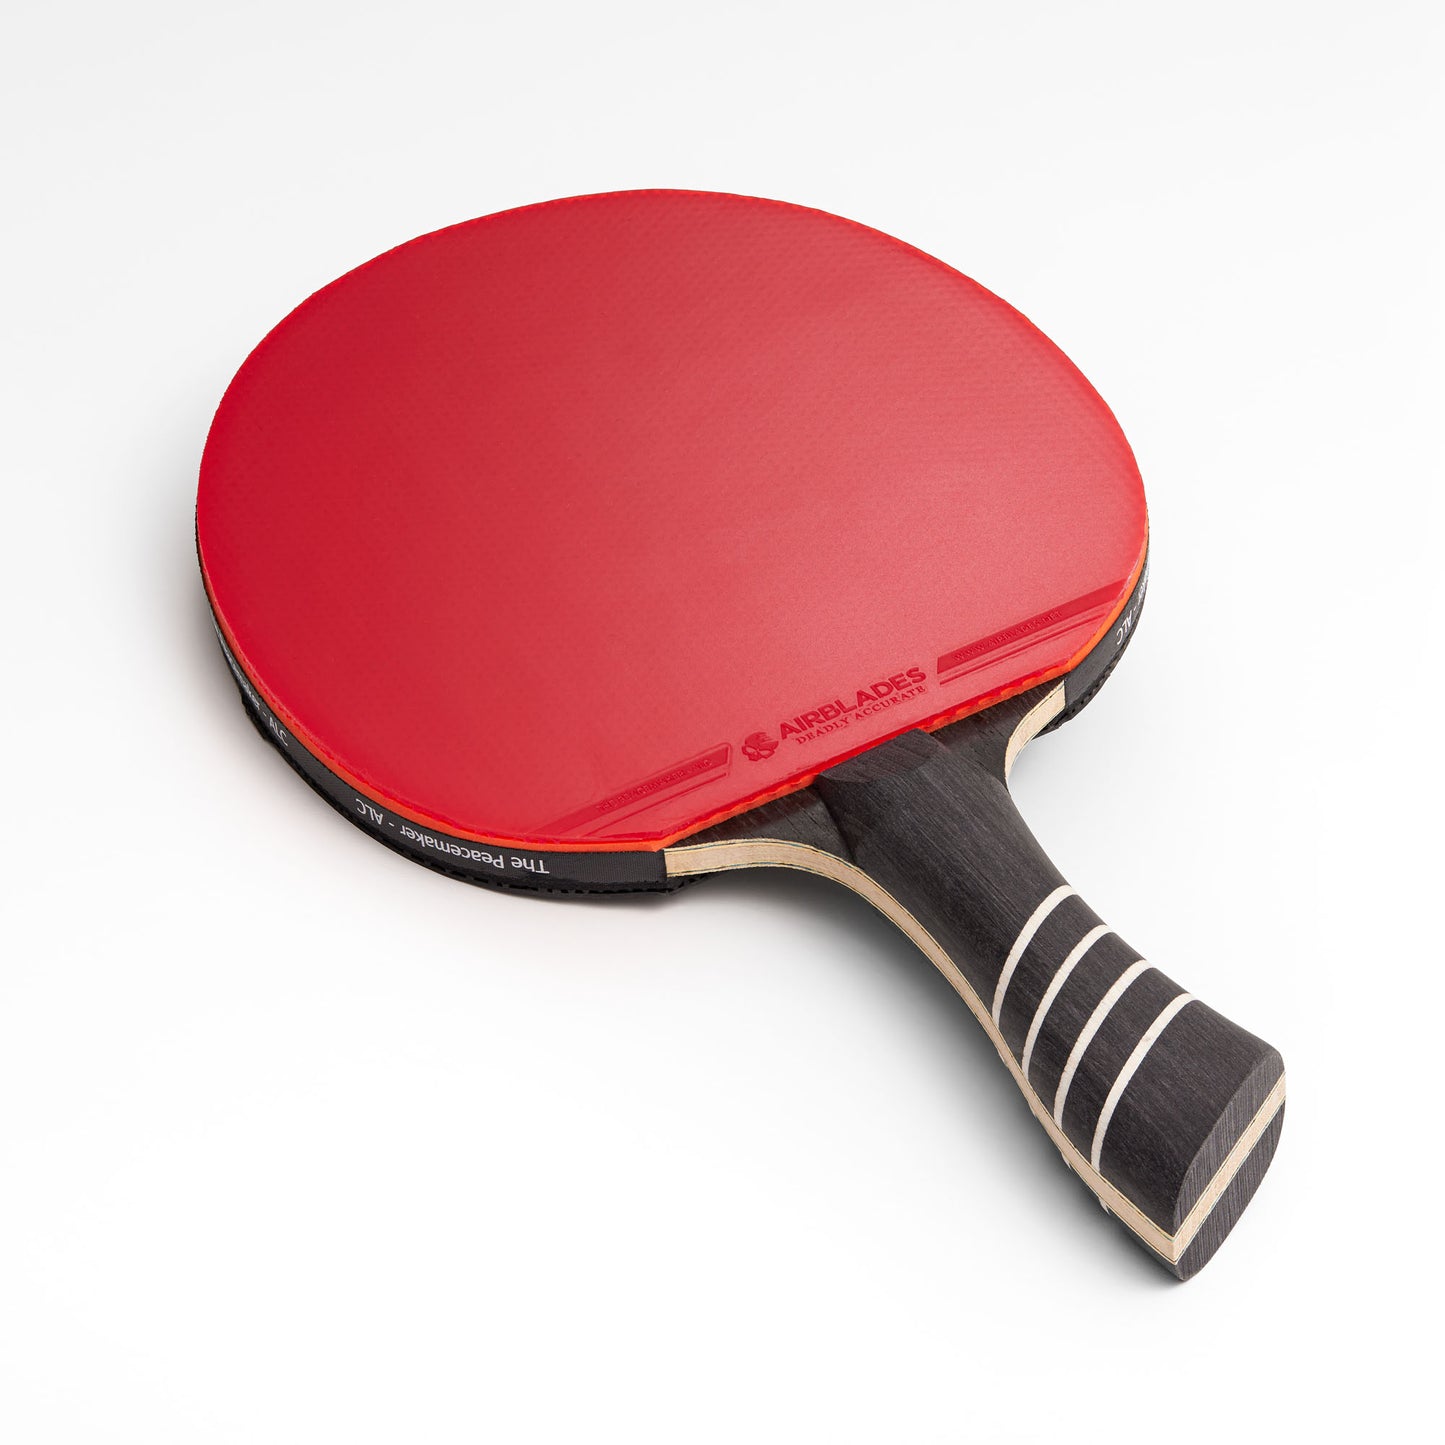 Peacemaker ALC: Professional Table Tennis Paddle - Patented SlopeHandle, 7-Ply Wood & Carbon Fiber